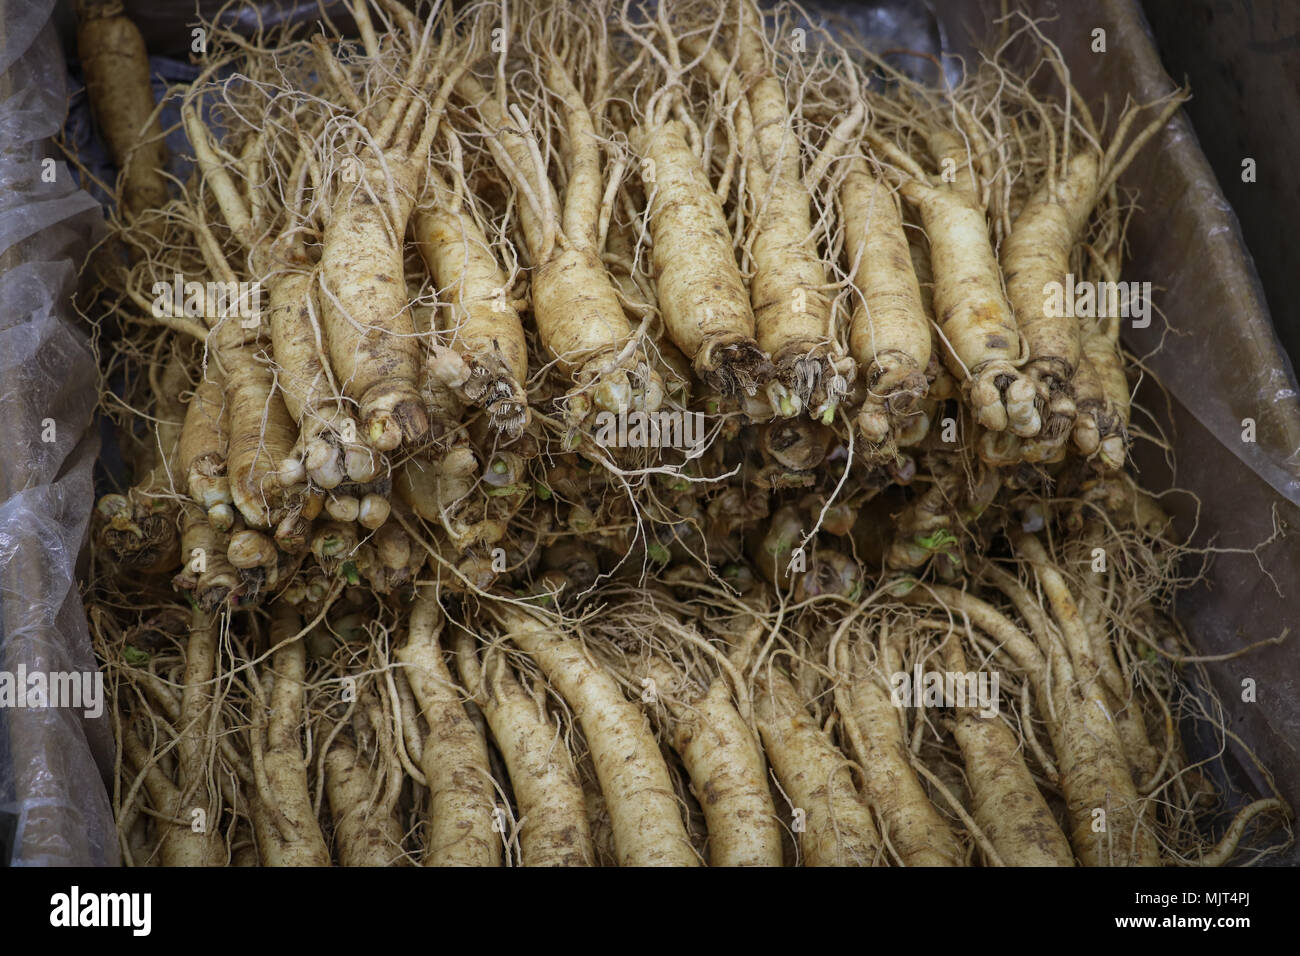 Stacks of fresh ginseng root for sale at the Traditional Market on Ganghwa Island, where many varieties and ages of this root are sold. Stock Photo